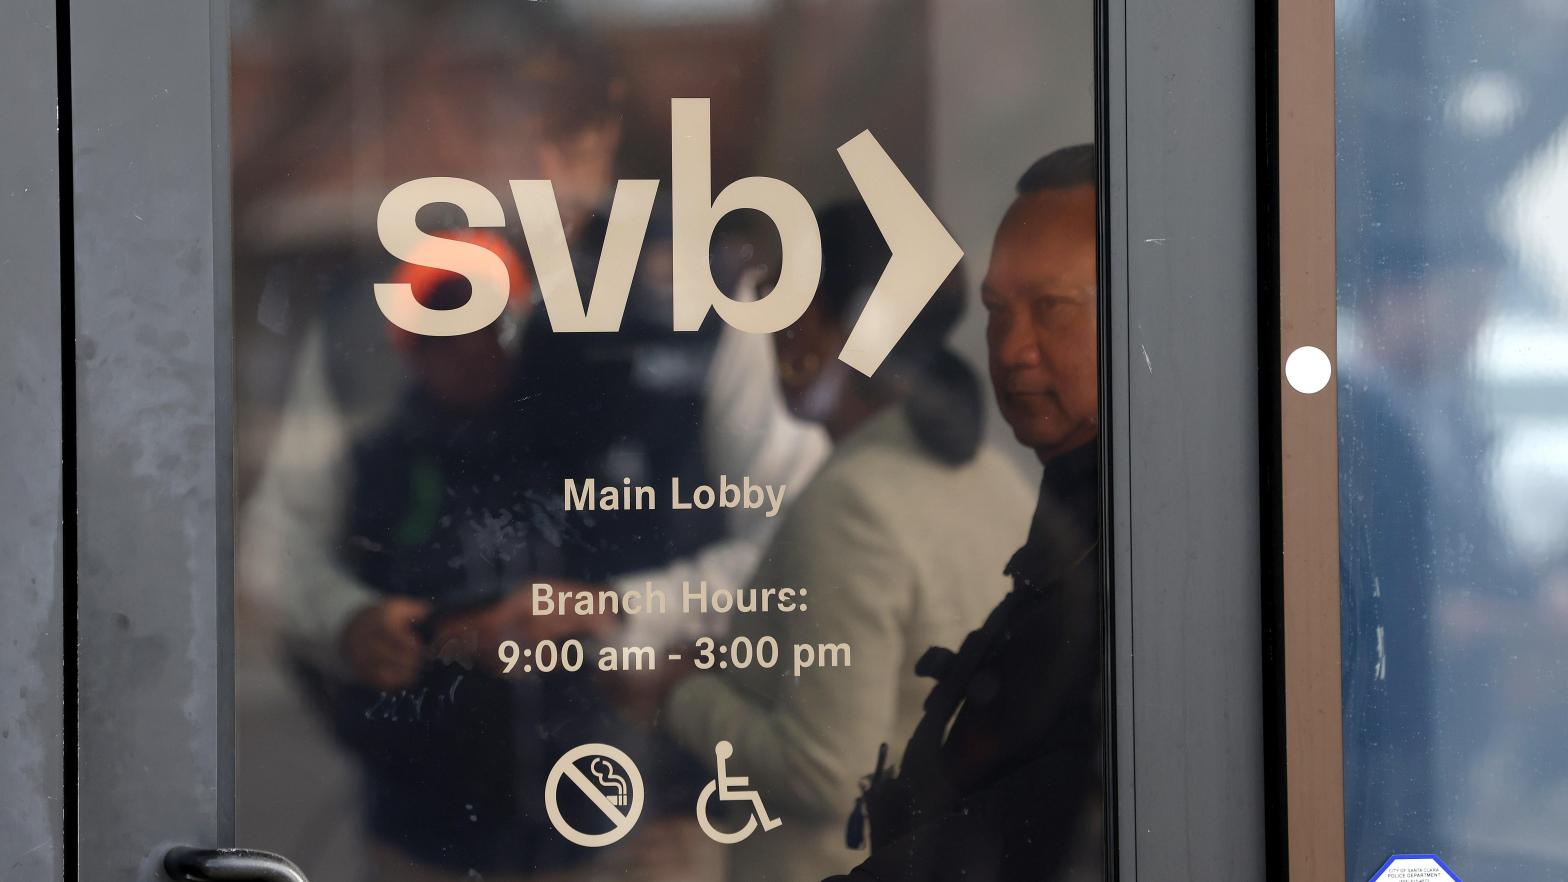 Silicon Valley Bank's once-parent company SVB Financial Group declared bankruptcy on Friday, just as more tech investors were jumping in line to put their money back into Silicon Valley Bank. (Photo: Justin Sullivan, Getty Images)